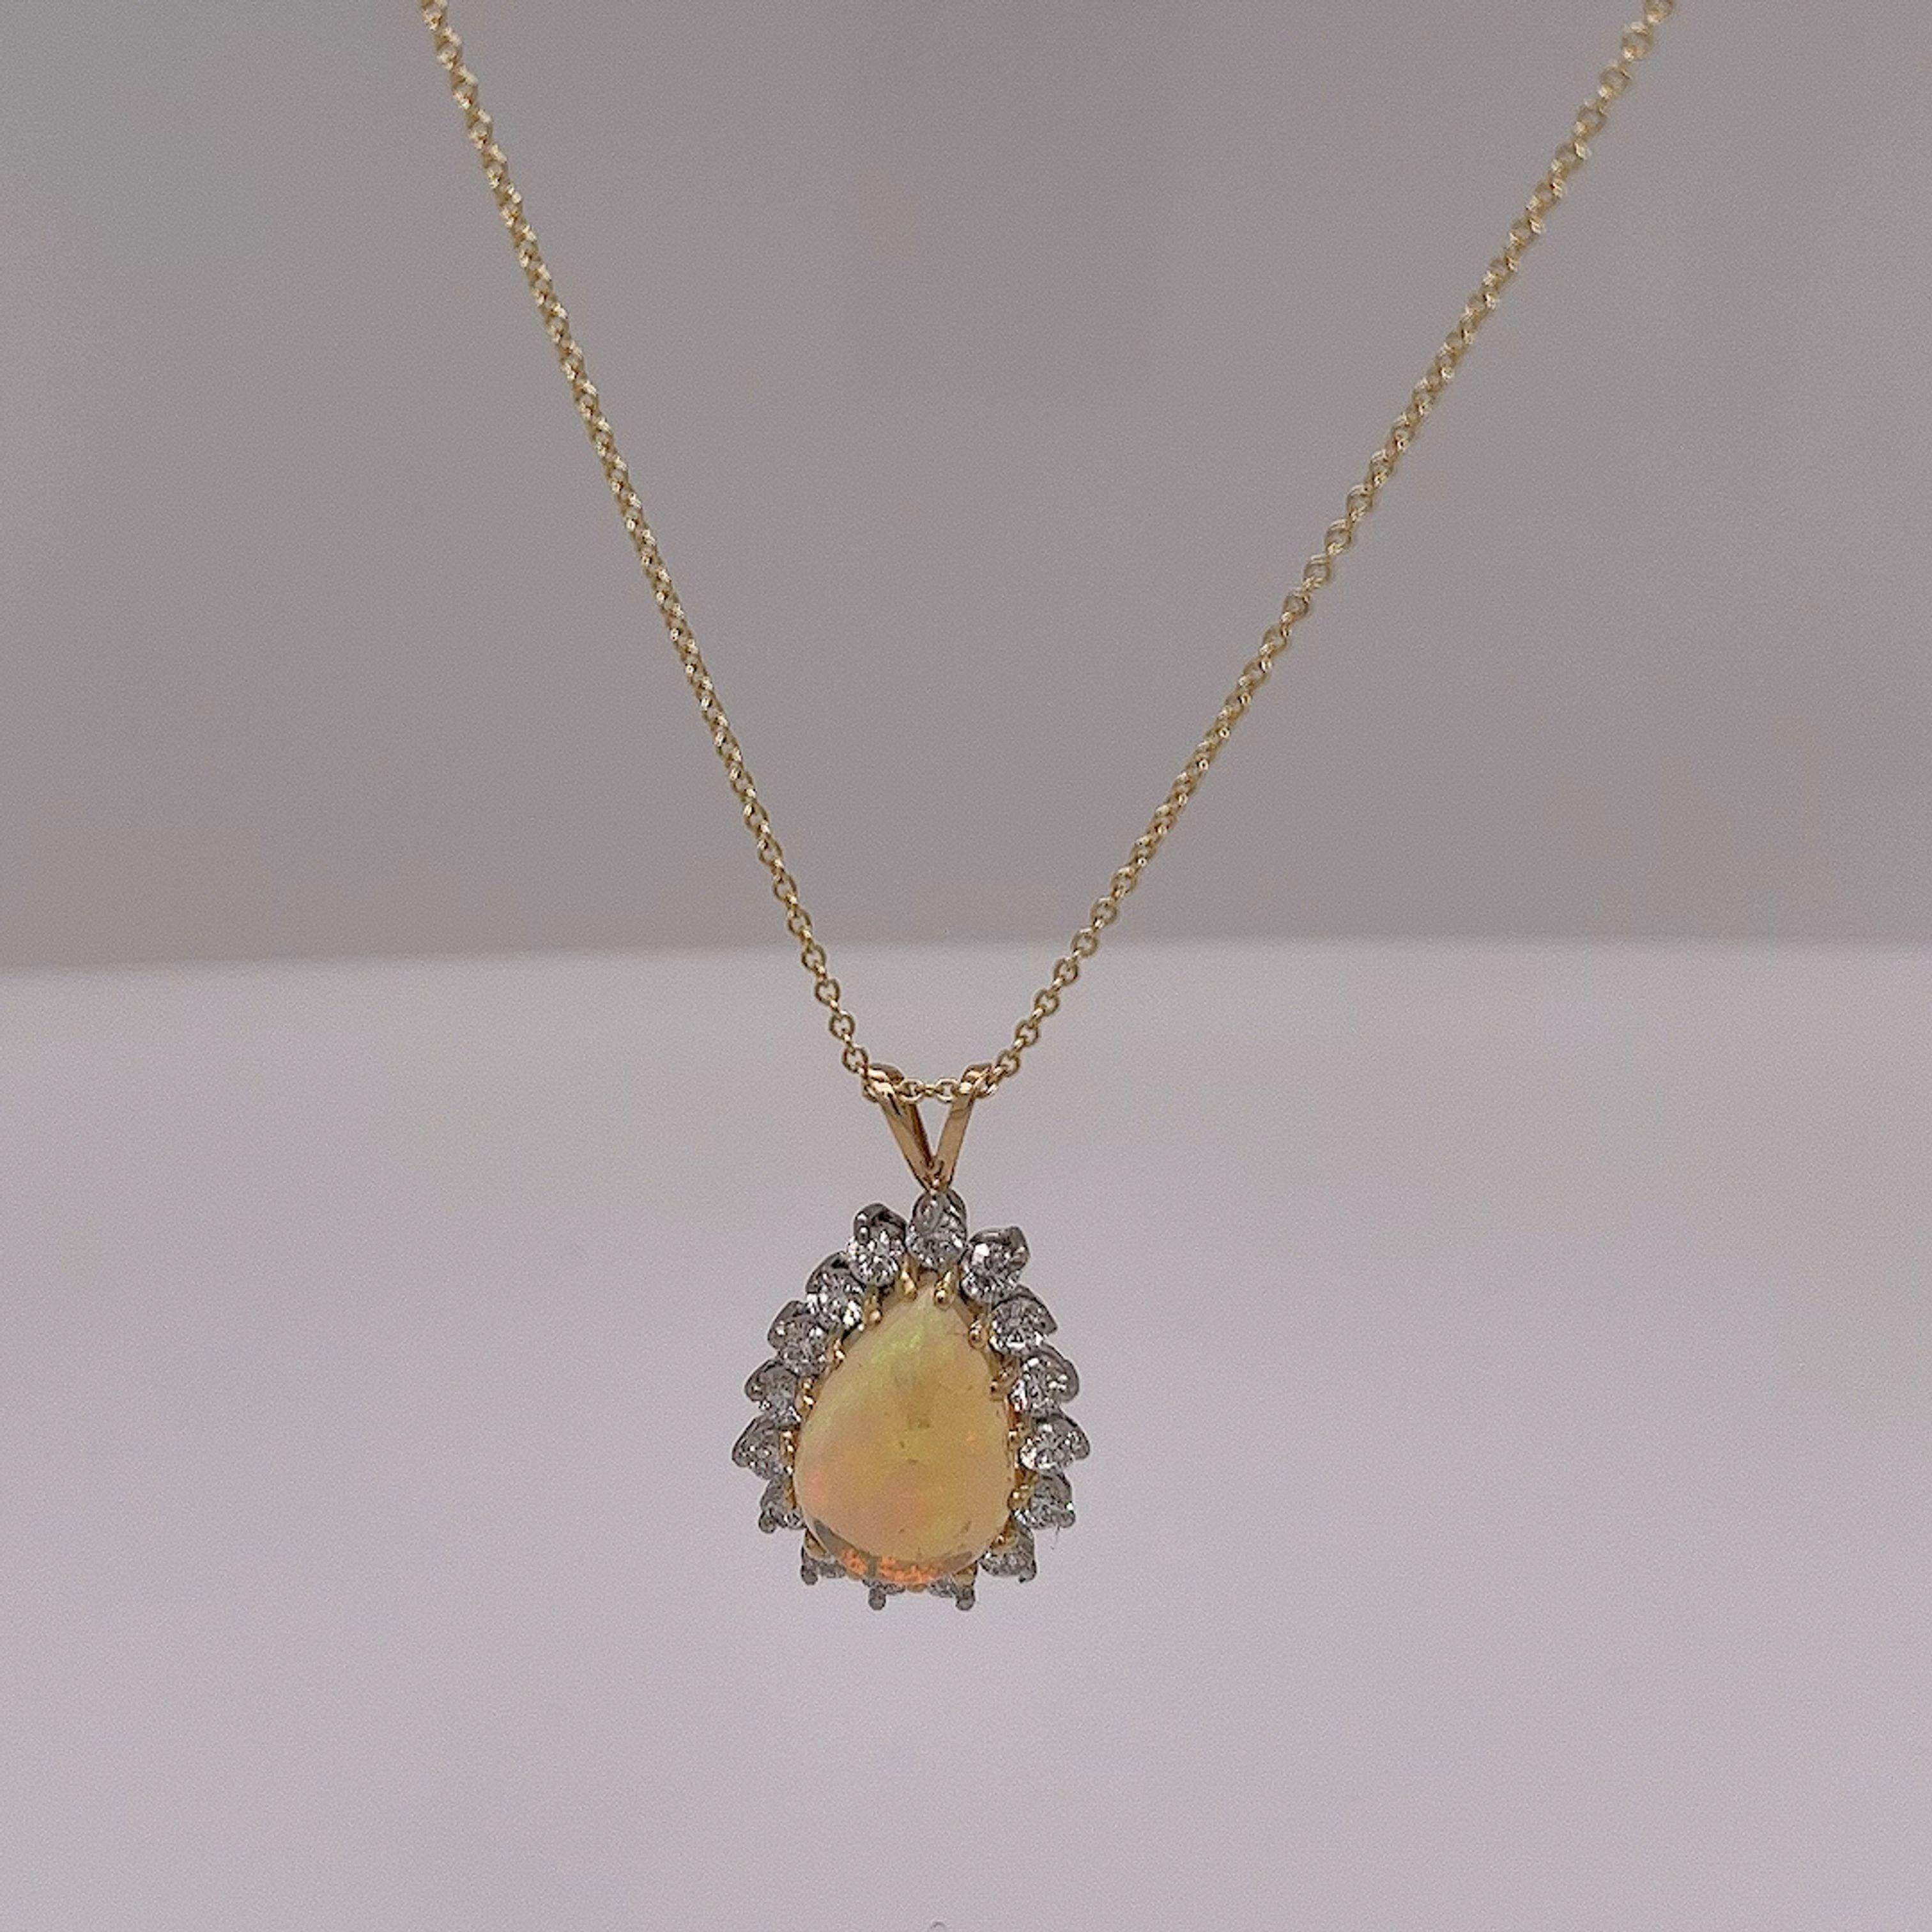 This gorgeous opal & diamond pendant is set with 1.50ct pear shape opal and 18 round brilliant cut diamonds in 18ct yellow gold setting.
The pendant is suspended from an 18ct yellow gold chain that measures 18 inches adjustable at 16